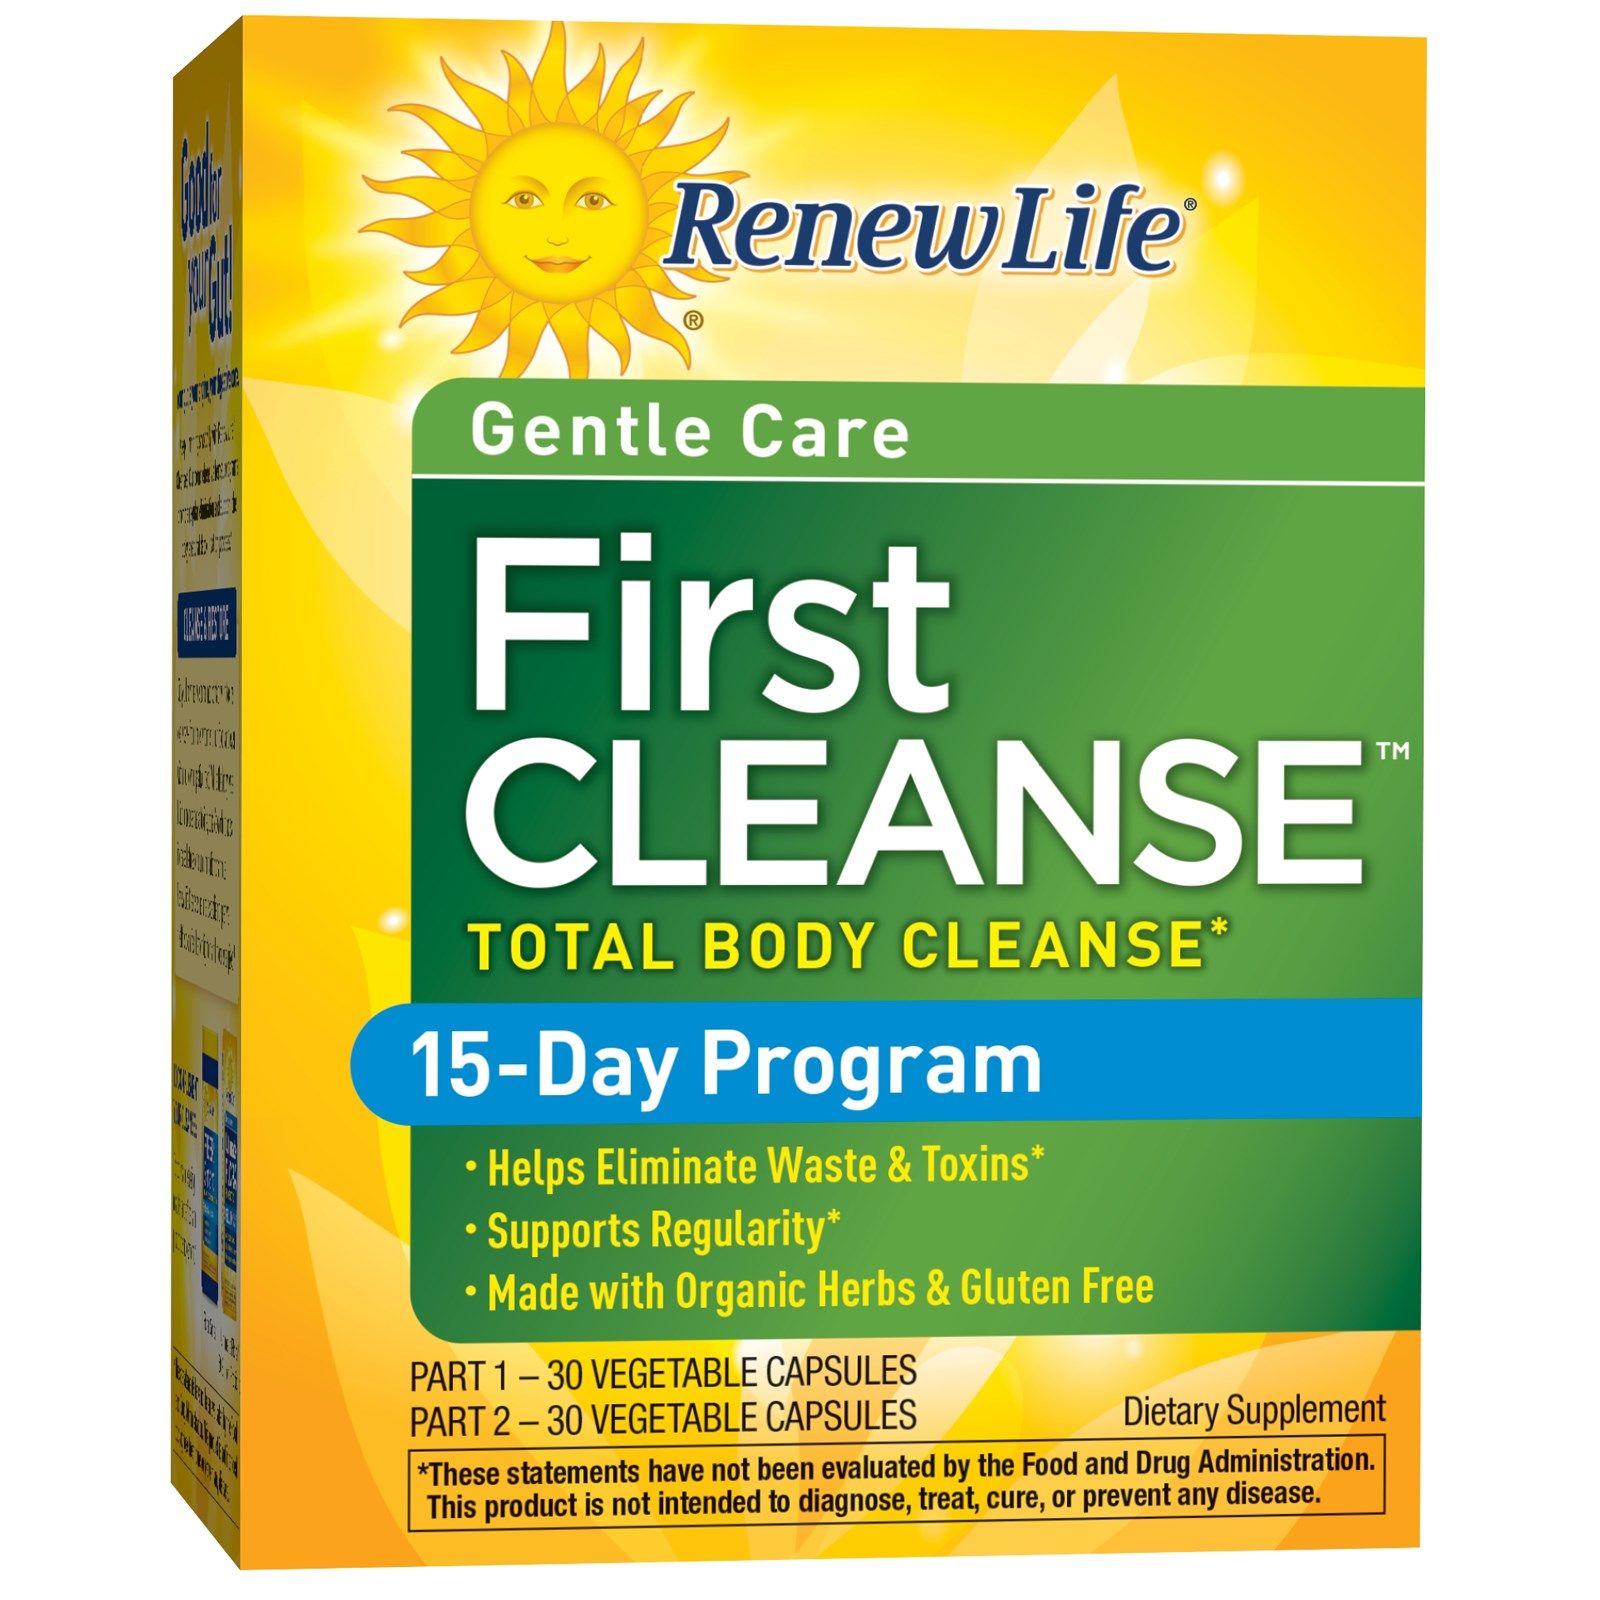 Body cleanse. Ферст лайф. Cleanse. Renew-Life-CANDISMART-15-Day-yeast-Cleansing-program-2-Part-program. Как принимать води детокс капсулы..